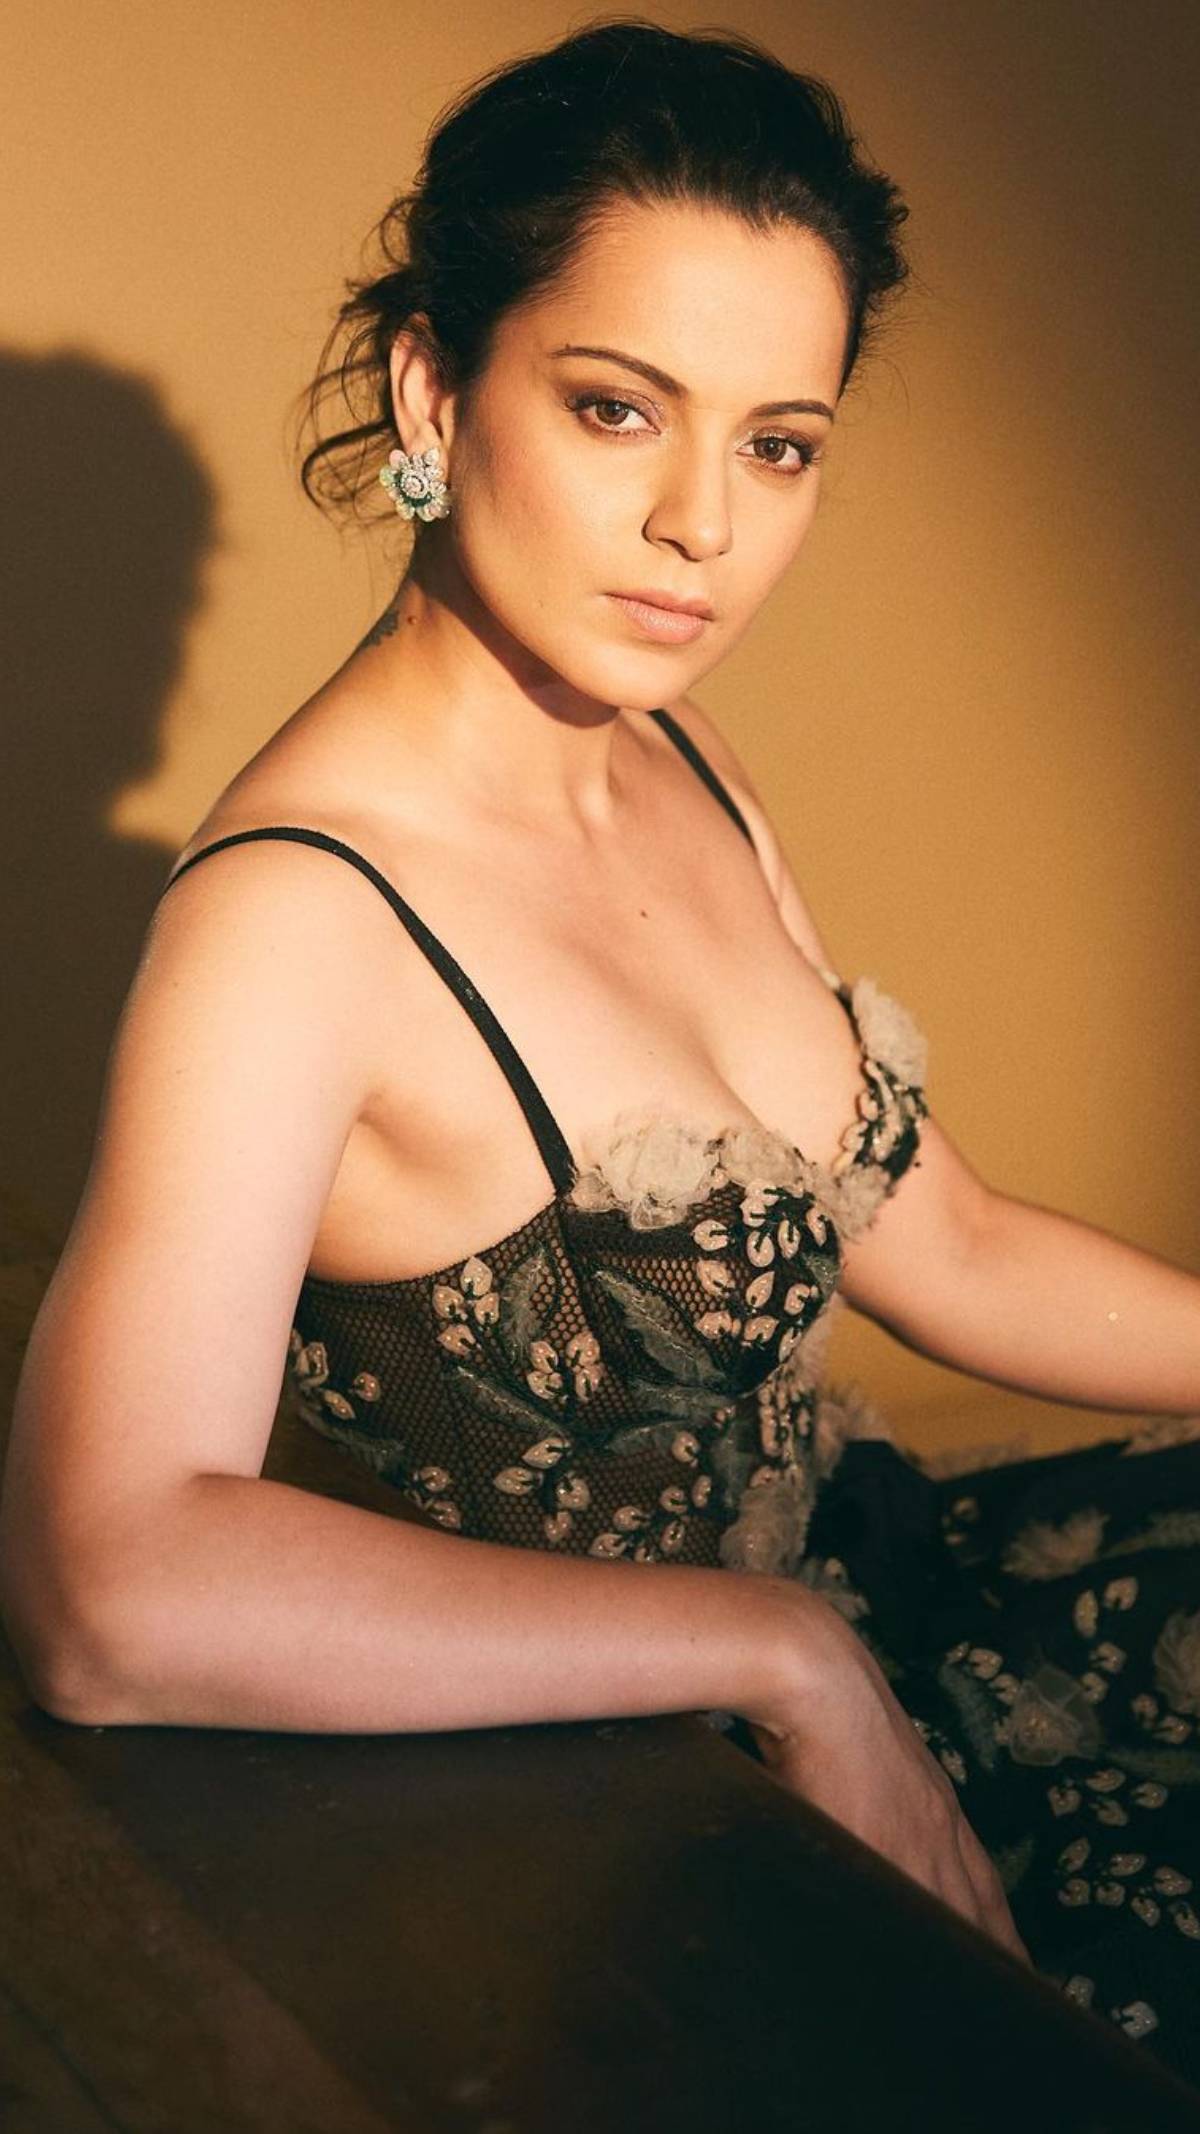 Kangana Ranaut flaunts her cleavage in the dress with a plunging neckline